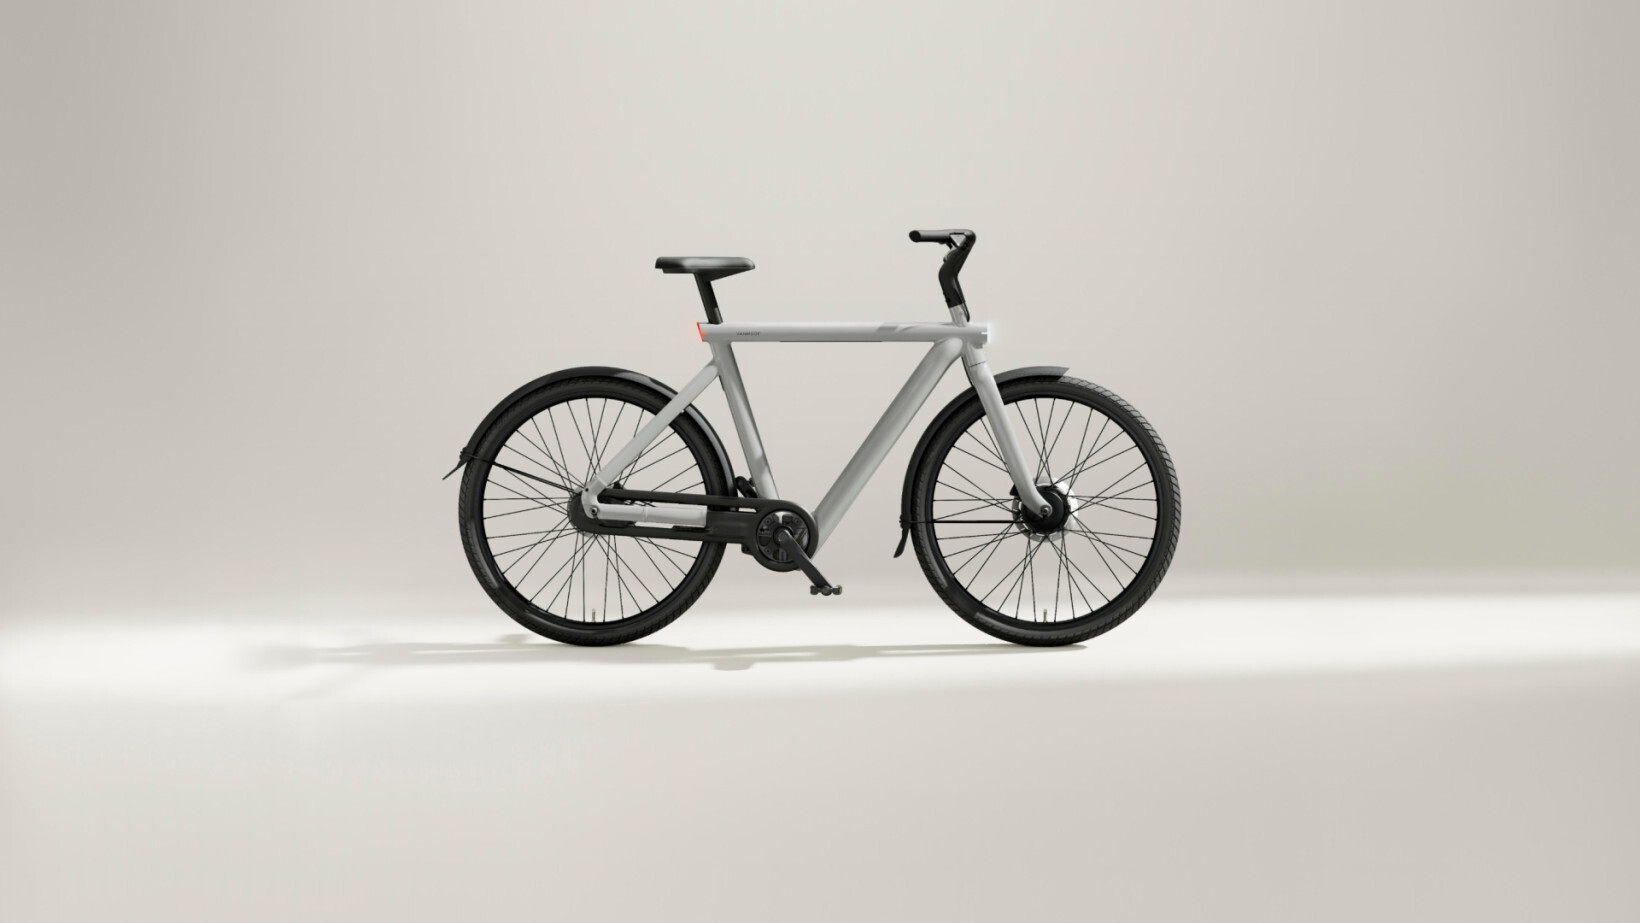 New hope for VanMoof as troubled ebike maker resumes sales